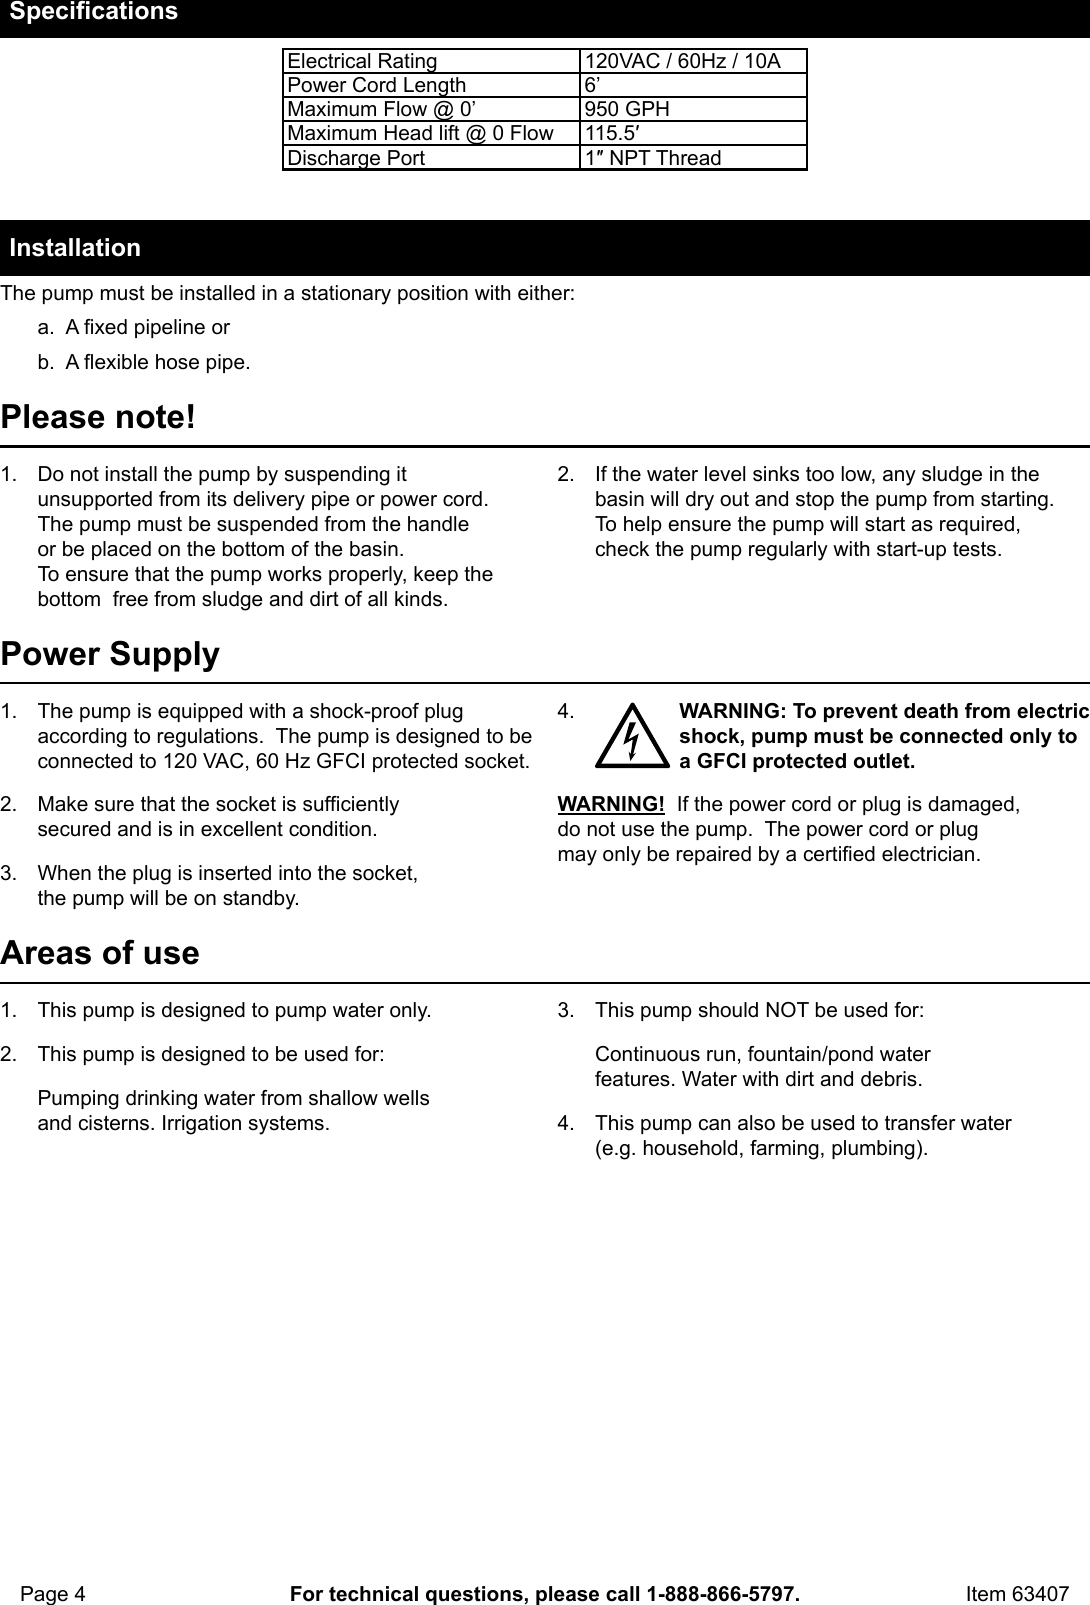 Page 4 of 12 - Manual For The 63407 1 HP Stainless Steel Shallow Well Pump And Tank With Pressure Control Switch - 950 GPH